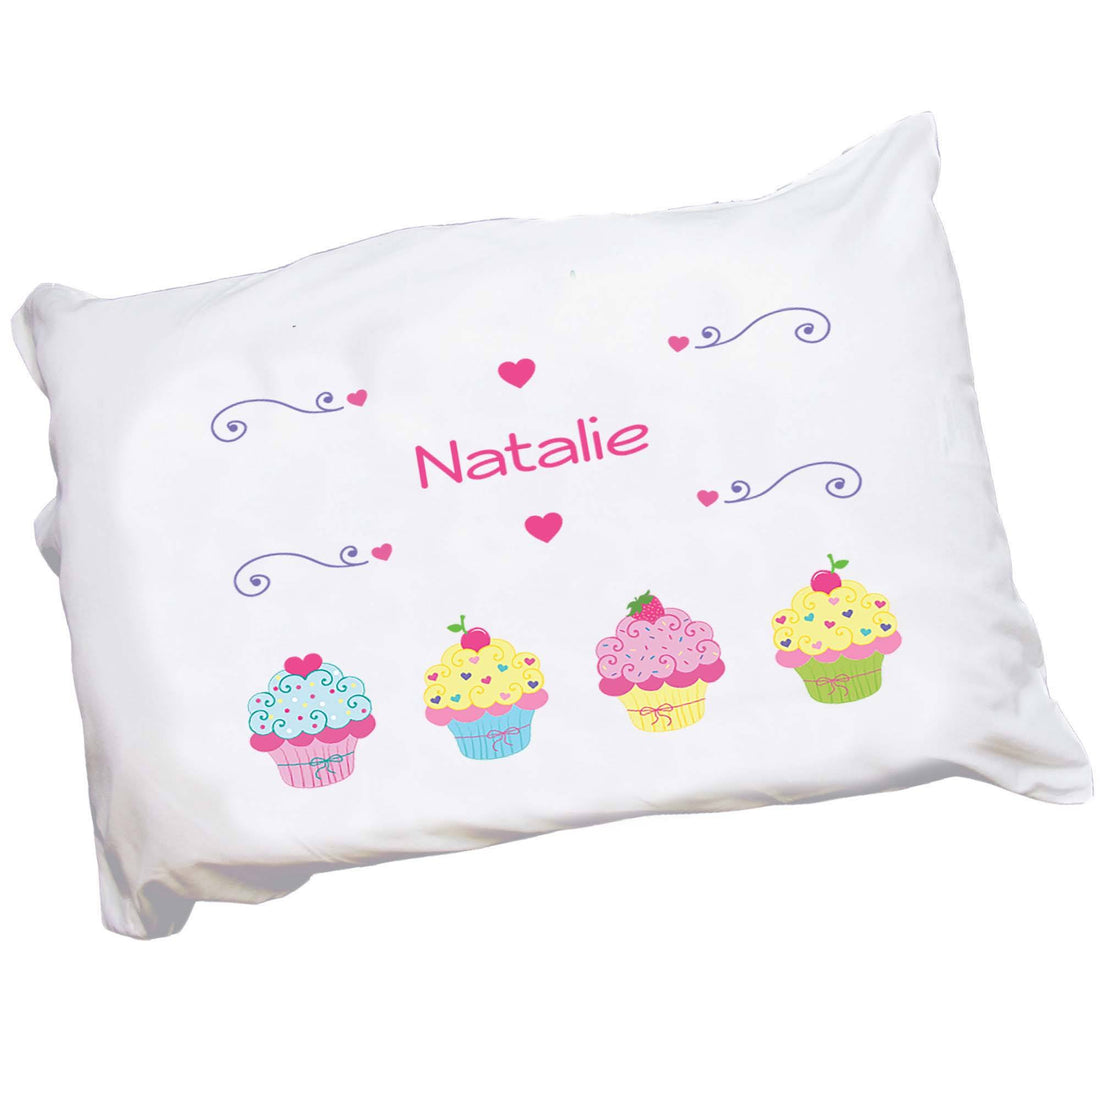 Personalized Childrens Pillowcase with Cupcake design